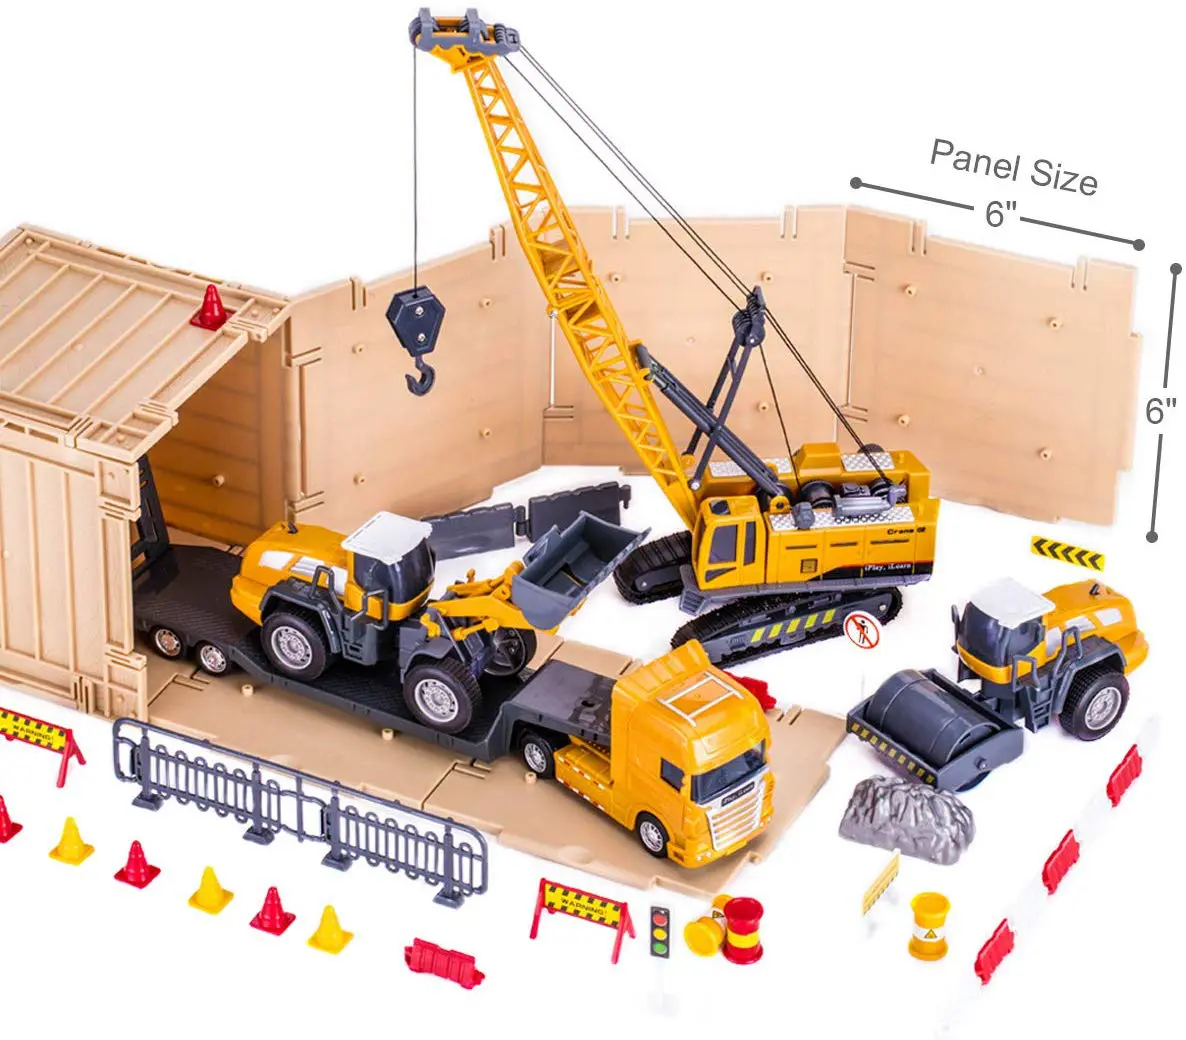 iPlay, iLearn Construction Vehicle Play Set - Top Toys and Gifts for Four Year Old Boys 2